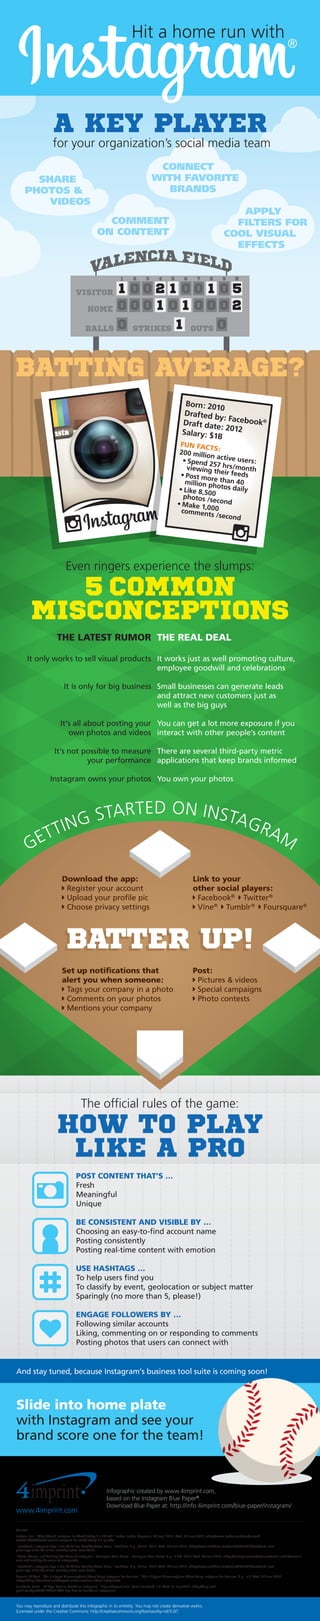 Hit a home run with 
A KEY PLAYER 
for your organization’s social media team 
CONNECT 
WITH FAVORITE 
APPLY 
FILTERS FOR 
COOL VISUAL 
EFFECTS 
COMMENT 
ON CONTENT 
BRANDS 
11 2 3 4 5 6 7 8 9 r 
SHARE 
PHOTOS & 
VIDEOS 
VISITOR 
HOME 
BALLS 
2 1 
1 
1 5 
1 2 
1 
STRIKES OUTS 
BATTING AVERAGE? 
B o rn : 2 010 
Draf ted by: Facebook® 
Draf t date : 2012 
Salary : $1B 
FUN FACTS : 
200 million active users: 
• Spend 257 hrs /month 
viewing their feeds 
• Post more than 40 
million photos daily 
• Like 8,500 
photos /second 
• Make 1,000 
comments /second 
Even ringers experience the slumps: 5 COMMON 
MISCONCEPTIONS 
THE LATEST RUMOR 
It only works to sell visual products 
It is only for big business 
It’s all about posting your 
own photos and videos 
It’s not possible to measure 
your performance 
Instagram owns your photos 
THE REAL DEAL 
It works just as well promoting culture, 
employee goodwill and celebrations 
Small businesses can generate leads 
and attract new customers just as 
well as the big guys 
You can get a lot more exposure if you 
interact with other people’s content 
There are several third-party metric 
applications that keep brands informed 
You own your photos 
GETTING S TAR T E D O N INSTAGRAM 
Download the app: 
 Register your account 
 Upload your profile pic 
 Choose privacy settings 
BATTTTEERR UPP!! 
Set up notifications that 
alert you when someone: 
 Tags your company in a photo 
 Comments on your photos 
 Mentions your company 
Link to your 
other social players: 
 Facebook®  Twitter® 
 Vine®  Tumblr®  Foursquare® 
Post: 
 Pictures  videos 
 Special campaigns 
 Photo contests 
The official rules of the game: HOW TO PLAY 
LIKE A PRO 
POST CONTENT THAT’S … 
Fresh 
Meaningful 
Unique 
BE CONSISTENT AND VISIBLE BY … 
Choosing an easy-to-find account name 
Posting consistently 
Posting real-time content with emotion 
USE HASHTAGS … 
To help users find you 
To classify by event, geolocation or subject matter 
Sparingly (no more than 5, please!) 
ENGAGE FOLLOWERS BY … 
Following similar accounts 
Liking, commenting on or responding to comments 
Posting photos that users can connect with 
And stay tuned, because Instagram’s business tool suite is coming soon! 
Slide into home plate 
with Instagram and see your 
brand score one for the team! 
www.4imprint.com 
Infographic created by www.4imprint.com, 
based on the Instagram Blue Paper®. 
Download Blue Paper at: http://info.4imprint.com/blue-paper/instagram/ 
Sources: 
Jackson, Eric. What Would Instagram Be Worth Today If It IPO'ed? Forbes. Forbes Magazine, 30 Sept. 2013. Web. 30 June 2014. http://www.forbes.com/sites/ericjack-son/ 
2013/09/30/what-would-instagram-be-worth-today-if-it-ipoed/. 
Facebook's Instagram Says It Has 90 Million Monthly Active Users. TechHive. N.p., 20 Jan. 2013. Web. 26 June 2014. http://www.techhive.com/article/2025801/facebooks-insta-gram- 
says-it-has-90-million-monthly-active-users.html. 
Views, Visuals, and Visibility: The Value of Instagram - Reimagine Main Street. Reimagine Main Street. N.p., 7 Feb. 2014. Web. 30 June 2014. http://reimaginemainstreet.com/social-media/views-vi-suals- 
and-visibility-the-value-of-instagram/. 
Facebook's Instagram Says It Has 90 Million Monthly Active Users. TechHive. N.p., 20 Jan. 2013. Web. 26 June 2014. http://www.techhive.com/article/2025801/facebooks-insta-gram- 
says-it-has-90-million-monthly-active-users.html. 
Davoult, Thibaut. The 5 Biggest Misconceptions About Using Instagram for Business. The 5 Biggest Misconceptions About Using Instagram for Business. N.p., n.d. Web. 30 June 2014. 
https://blog.kissmetrics.com/biggest-misconceptions-about-instagram/. 
Bunskoek, Krista. 52 Tips: How to Market on Instagram. Blog.wishpond.com. Krista Bunskoek, n.d. Web. 31 July 2014. http://blog.wish-pond. 
com/post/59612395517/52-tips-how-to-market-on-instagram 
You may reproduce and distribute this infographic in its entirety. You may not create derivative works. 
(Licensed under the Creative Commons: http://creativecommons.org/licenses/by-nd/3.0/) 
® 
